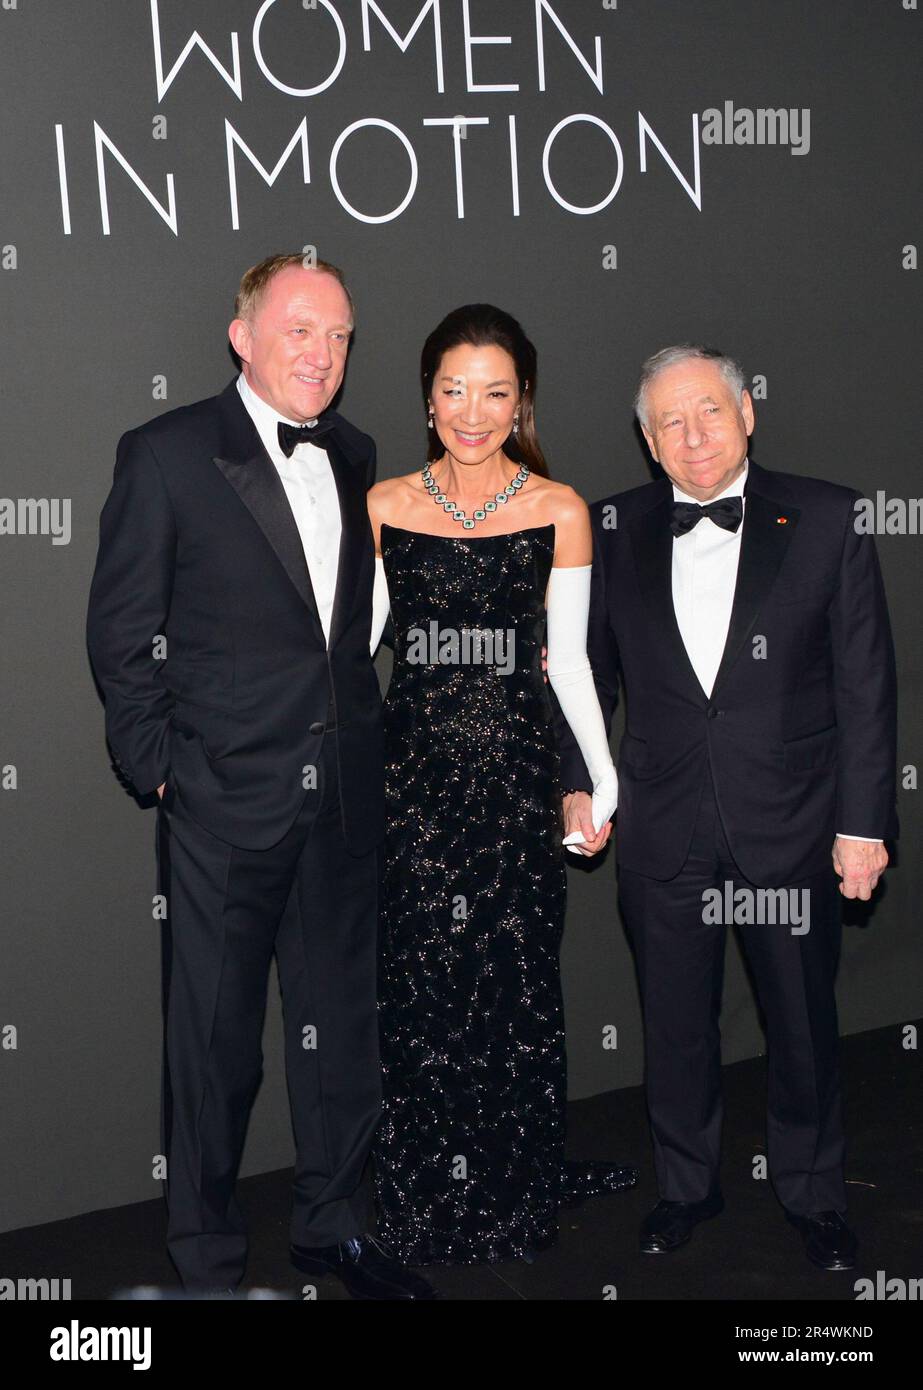 French businessman, chairman and CEO of Kering, Francois-Henri Pinault,  World's top luxury group LVMH head Bernard Arnault and CEO of LVMH Holding  Company, Antoine Arnault during Jean-Louis Georgelin's national tribute  held at